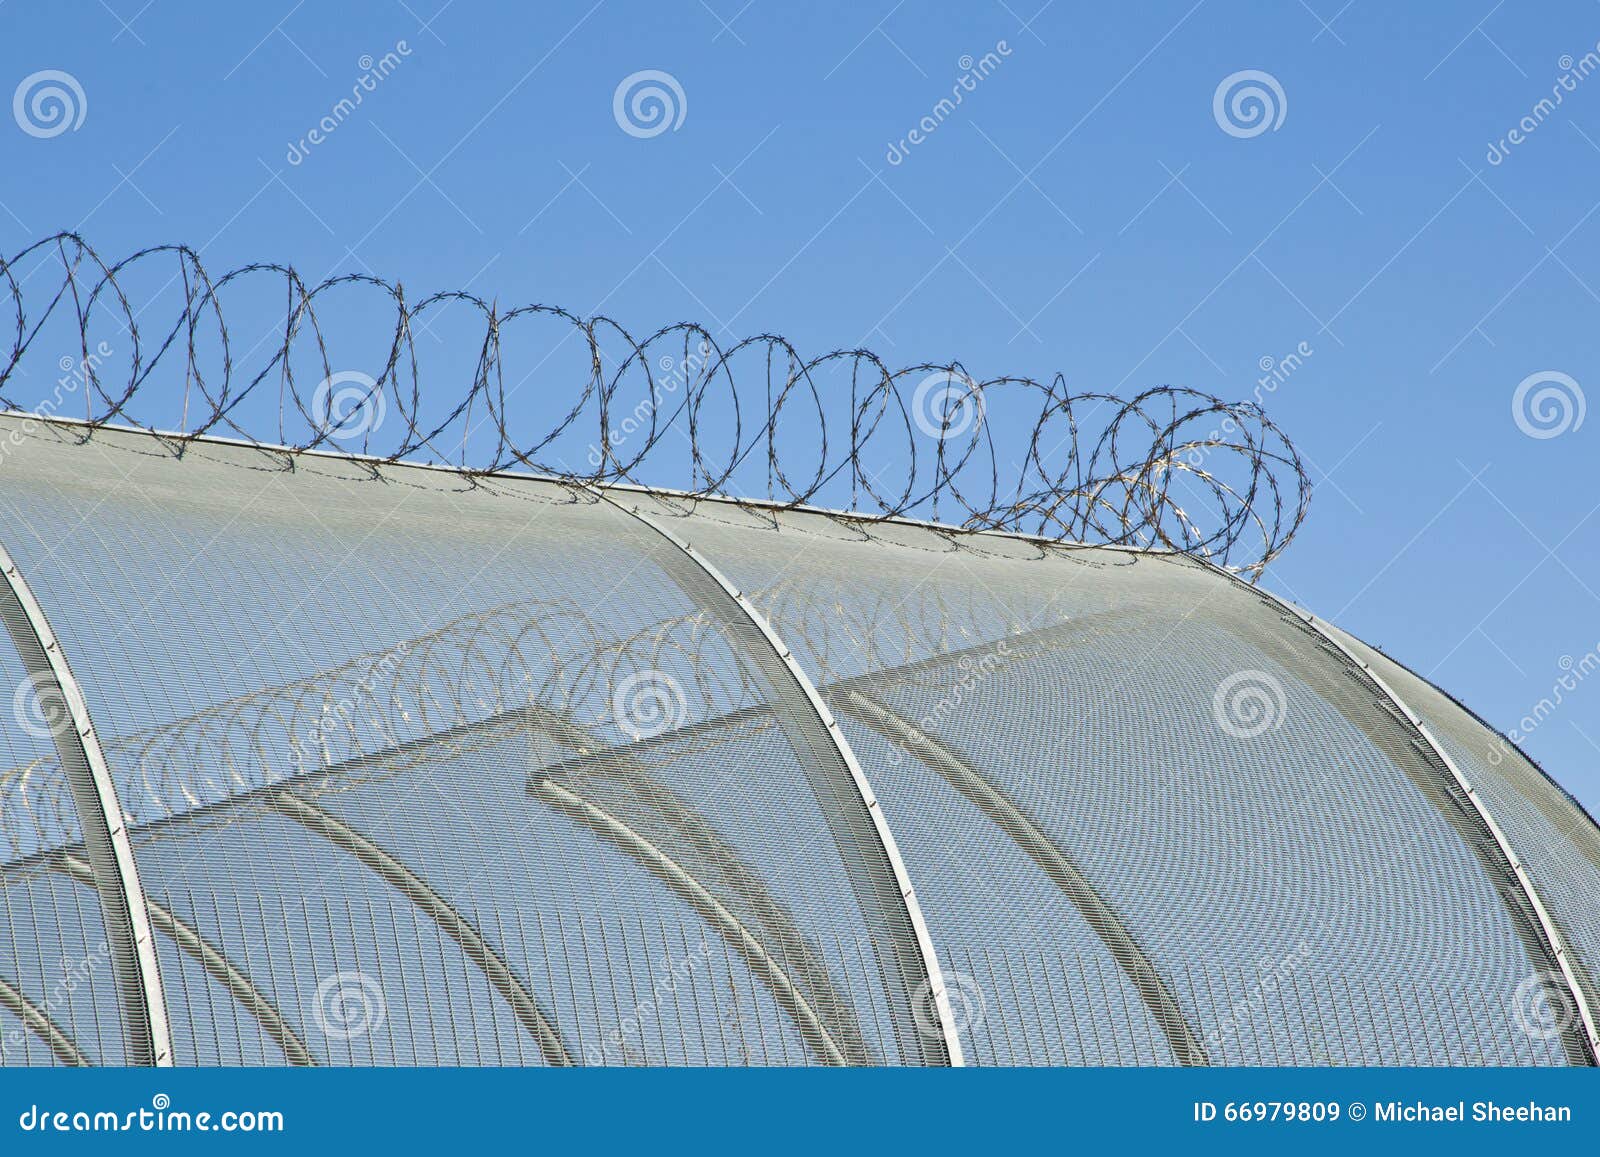 security fencing detail